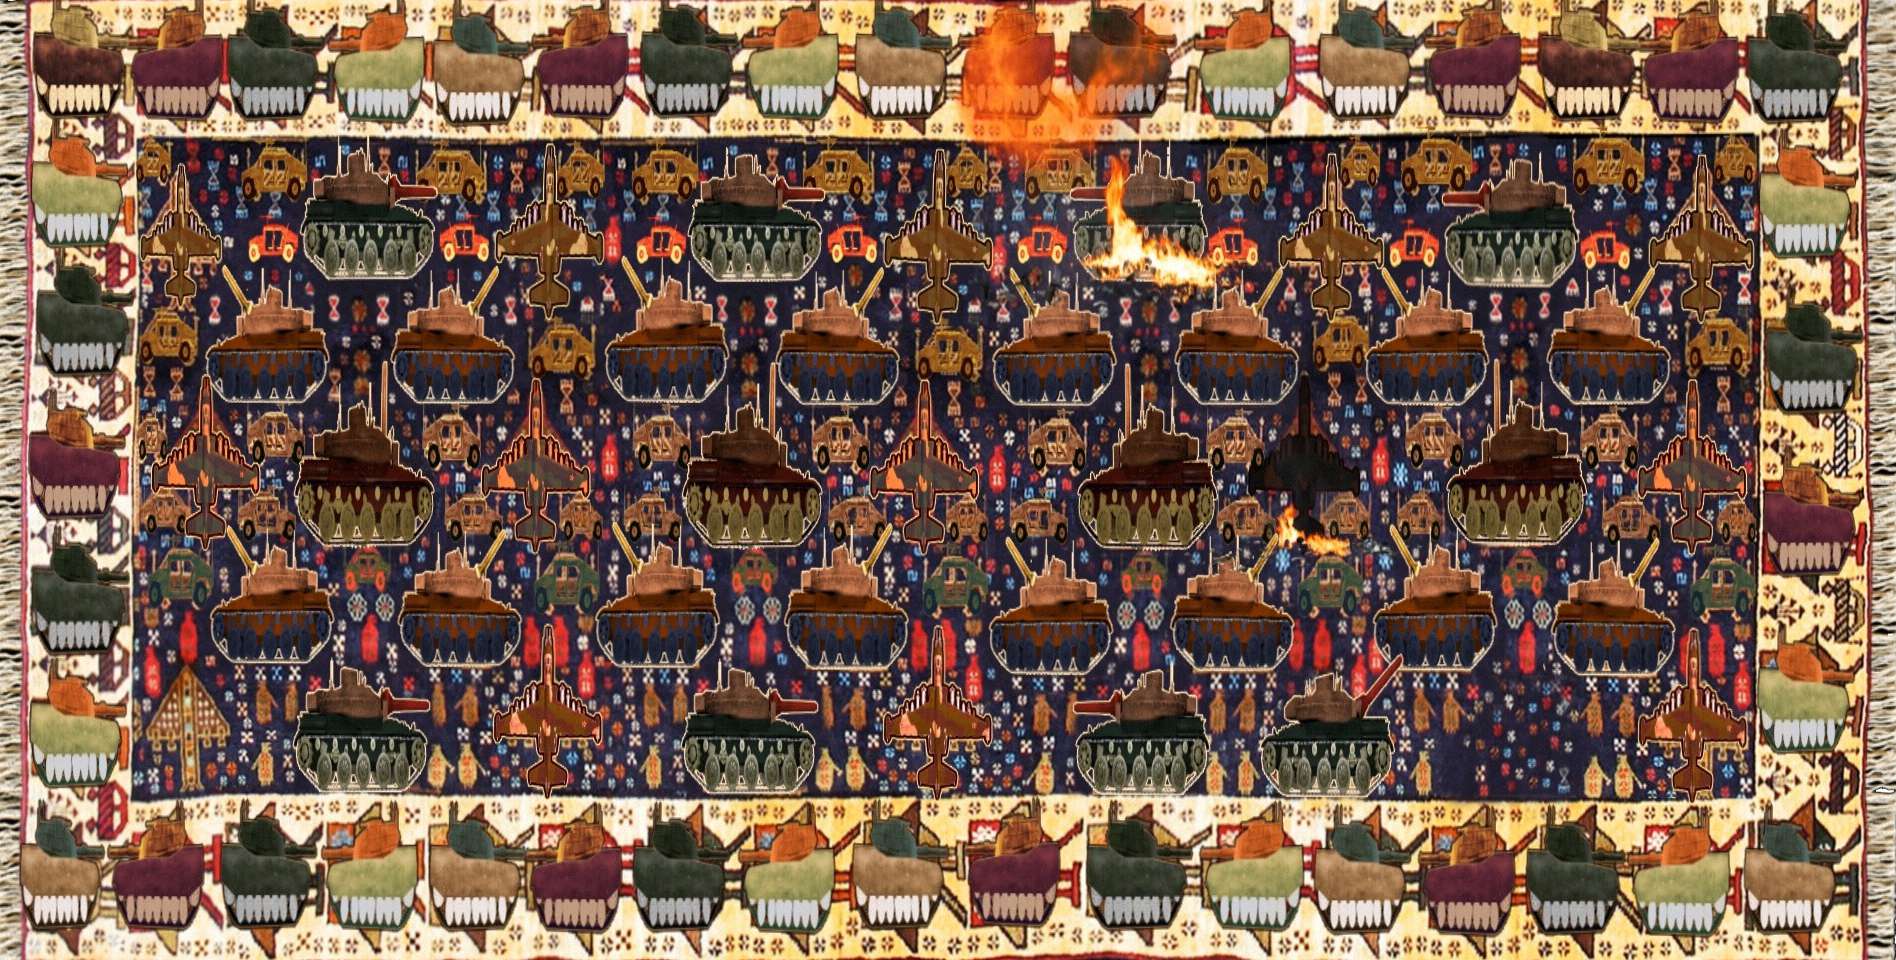 "War Rug #3",
2014,
single-channel video, 
color, stereo sound,
duration 8 min, 
dimensions variable